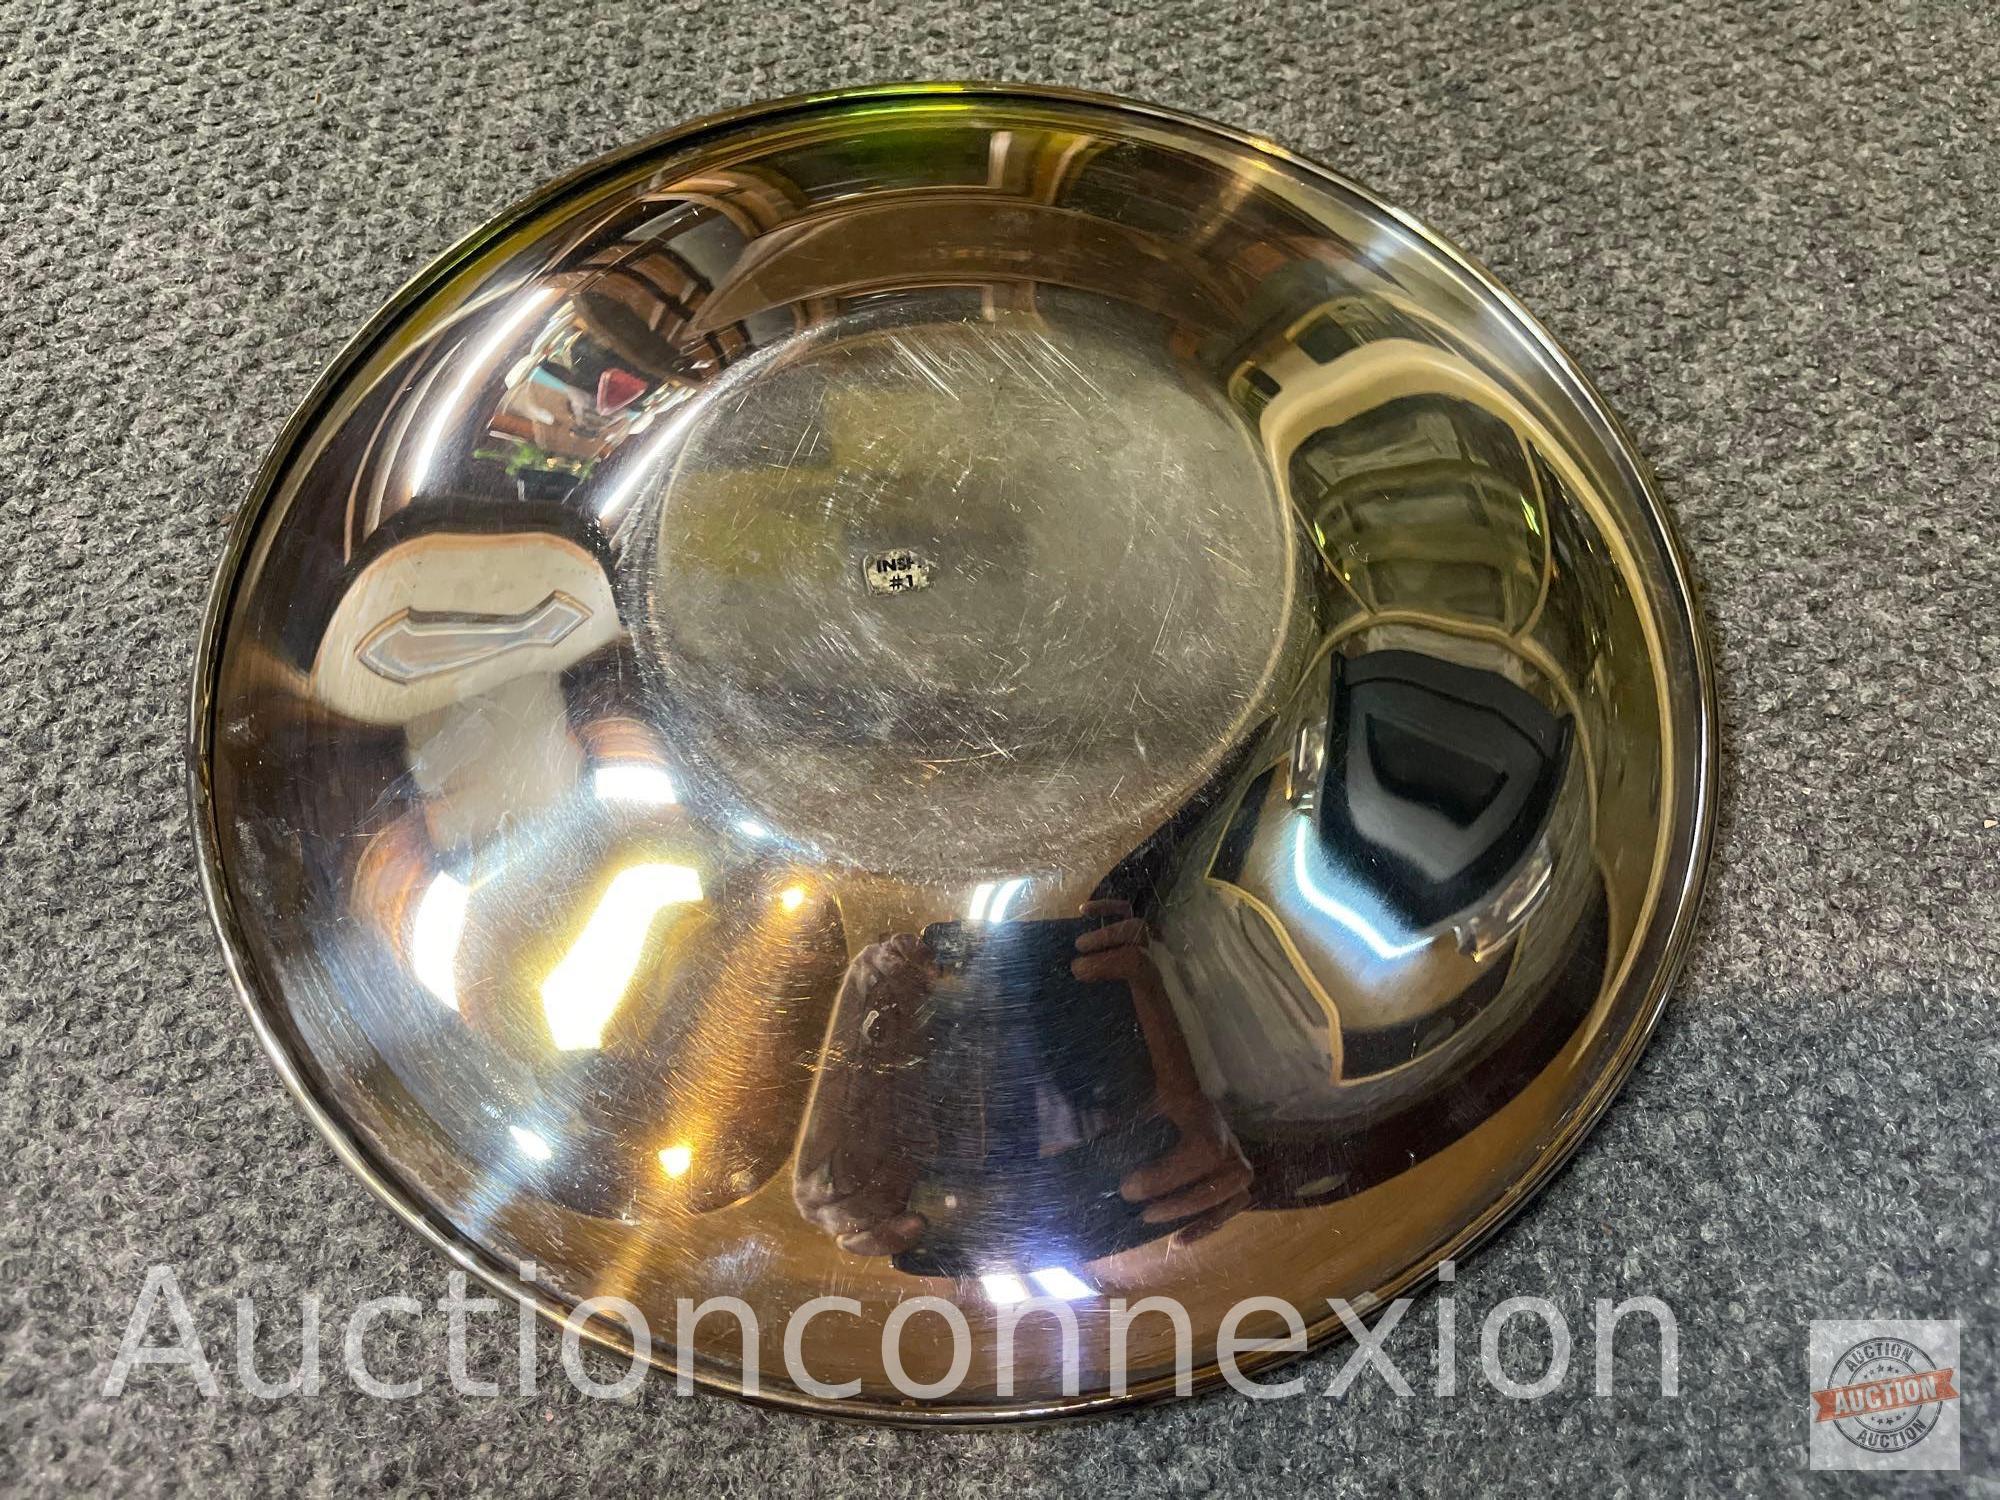 Metal ware - serving ware and platters etc. 8 items